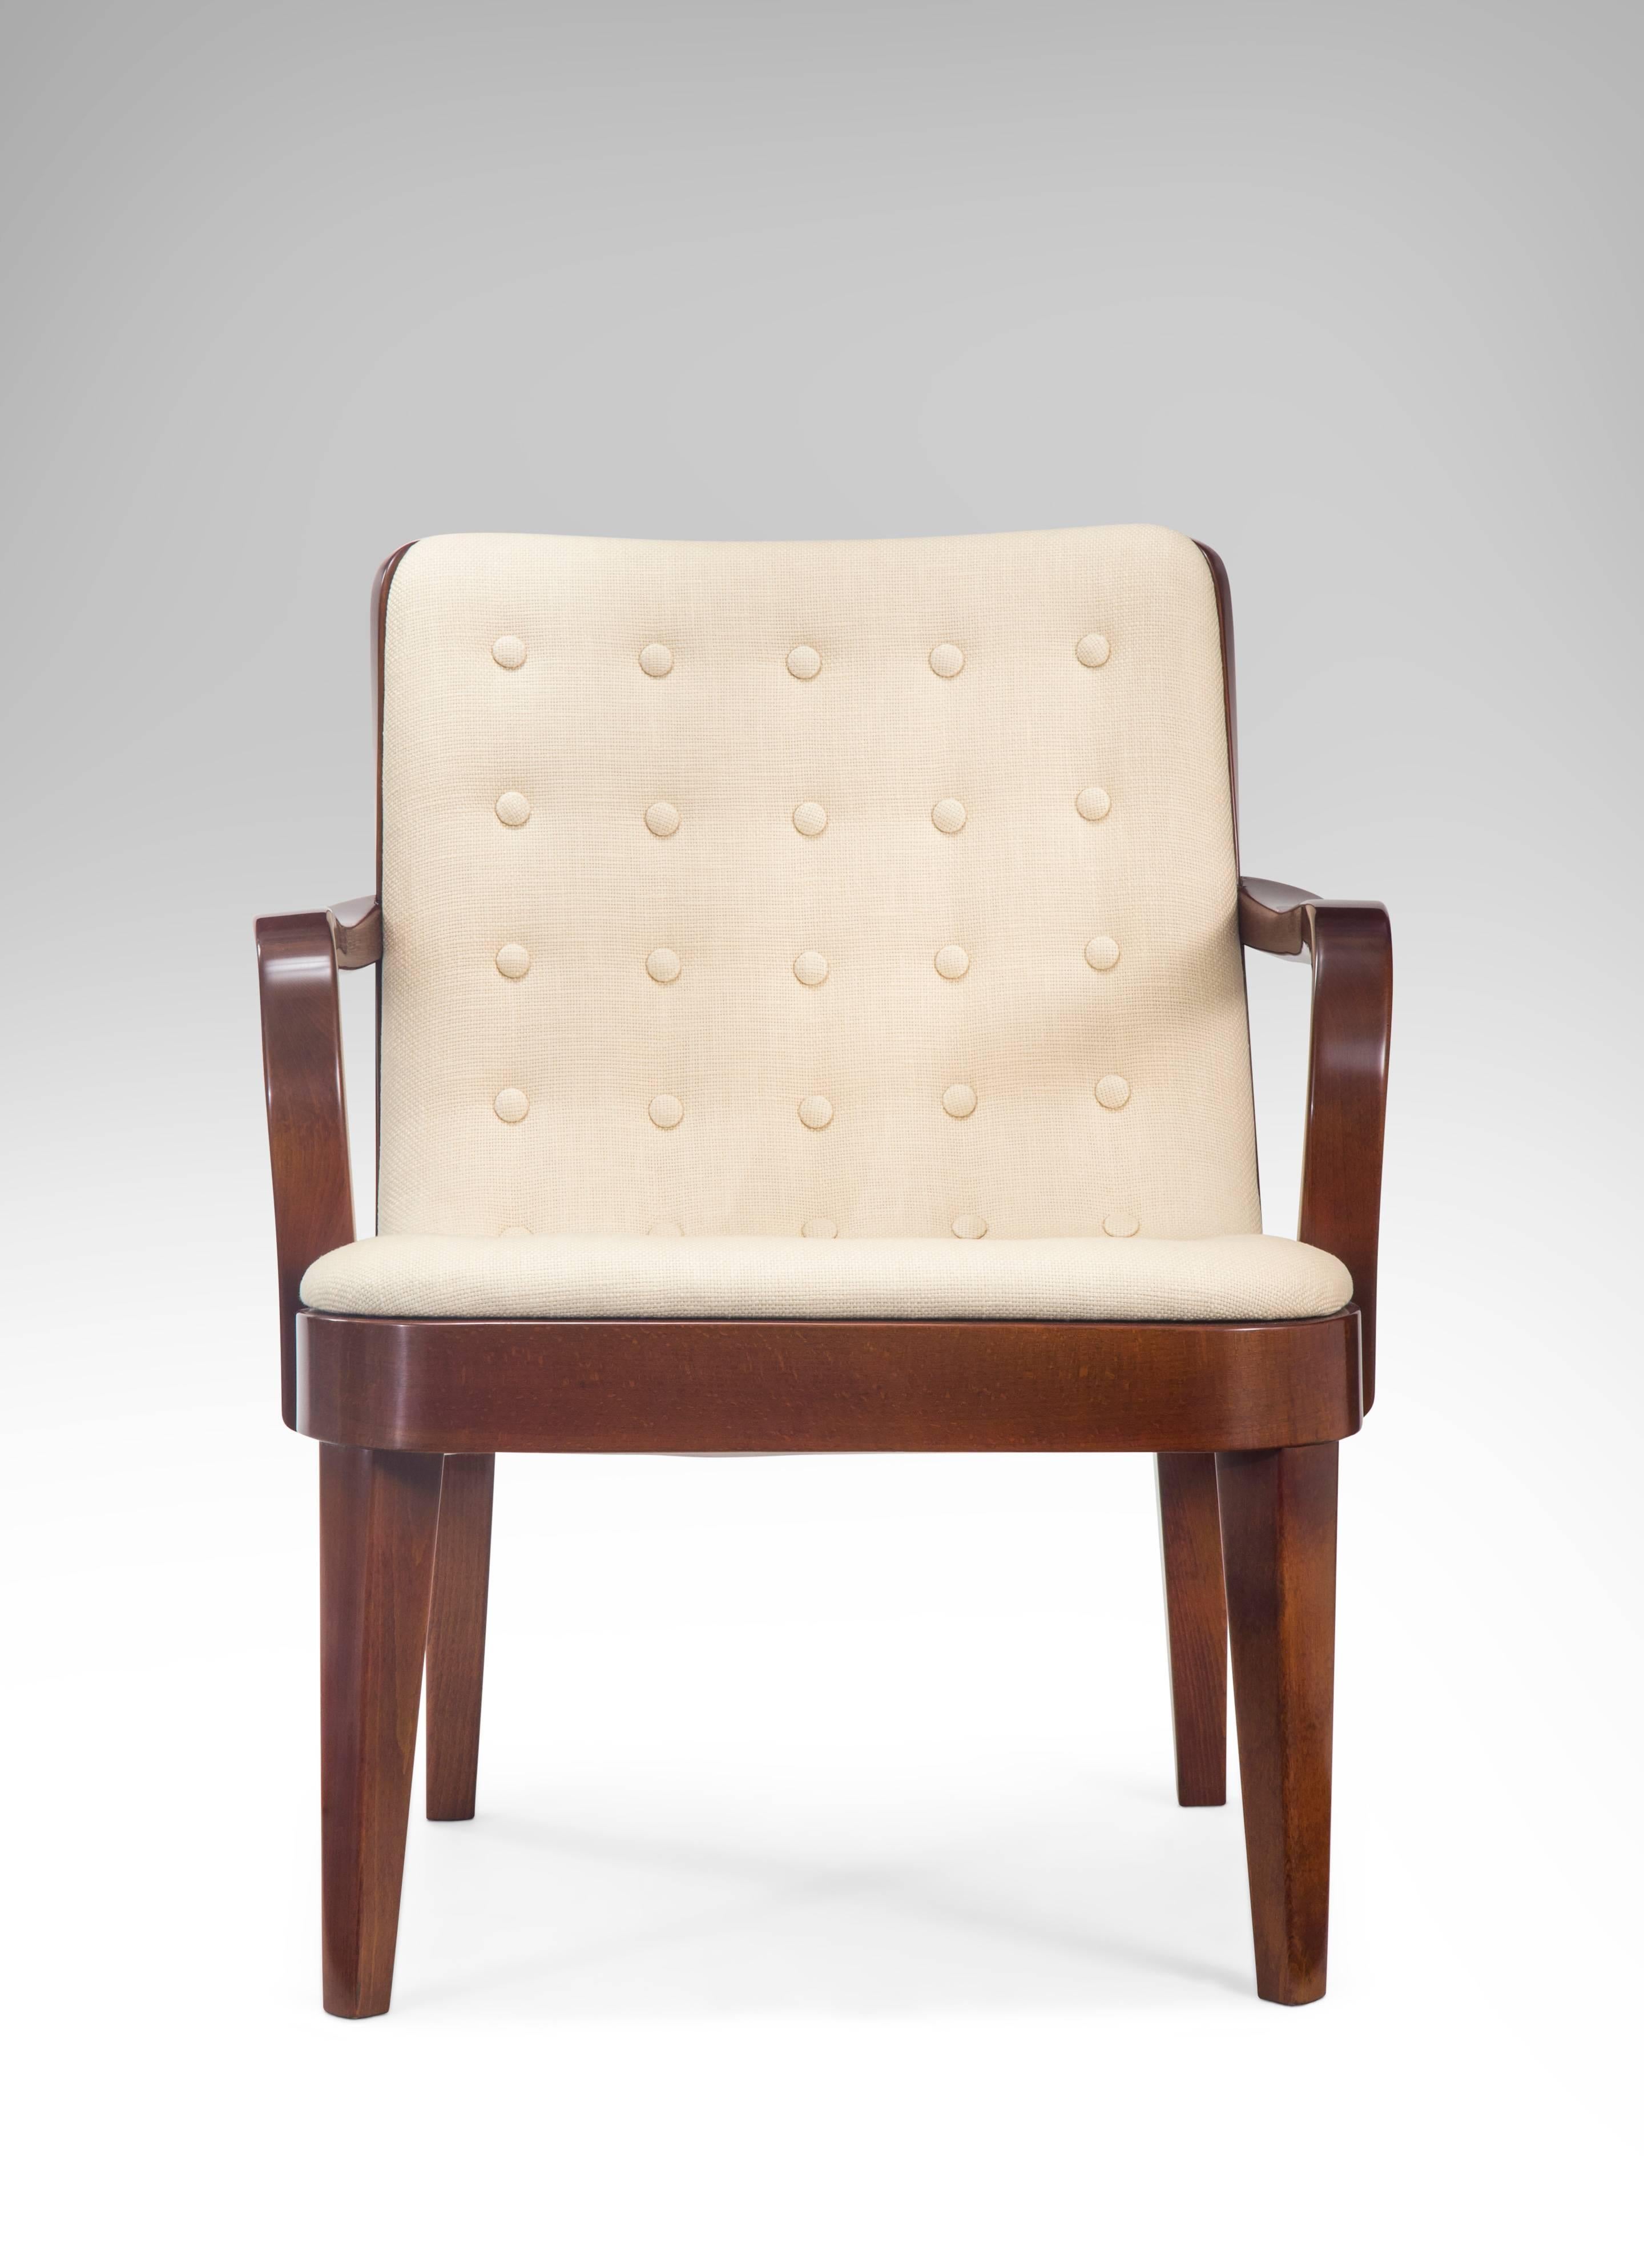 A sophisticated and comfortable design by Axel Larsson. Each concave toprail, above a profusely tufted upholstered back and seat cushion, issuing two curved arms, on tapered legs.

In very nice condition, beautiful finish, new authentic